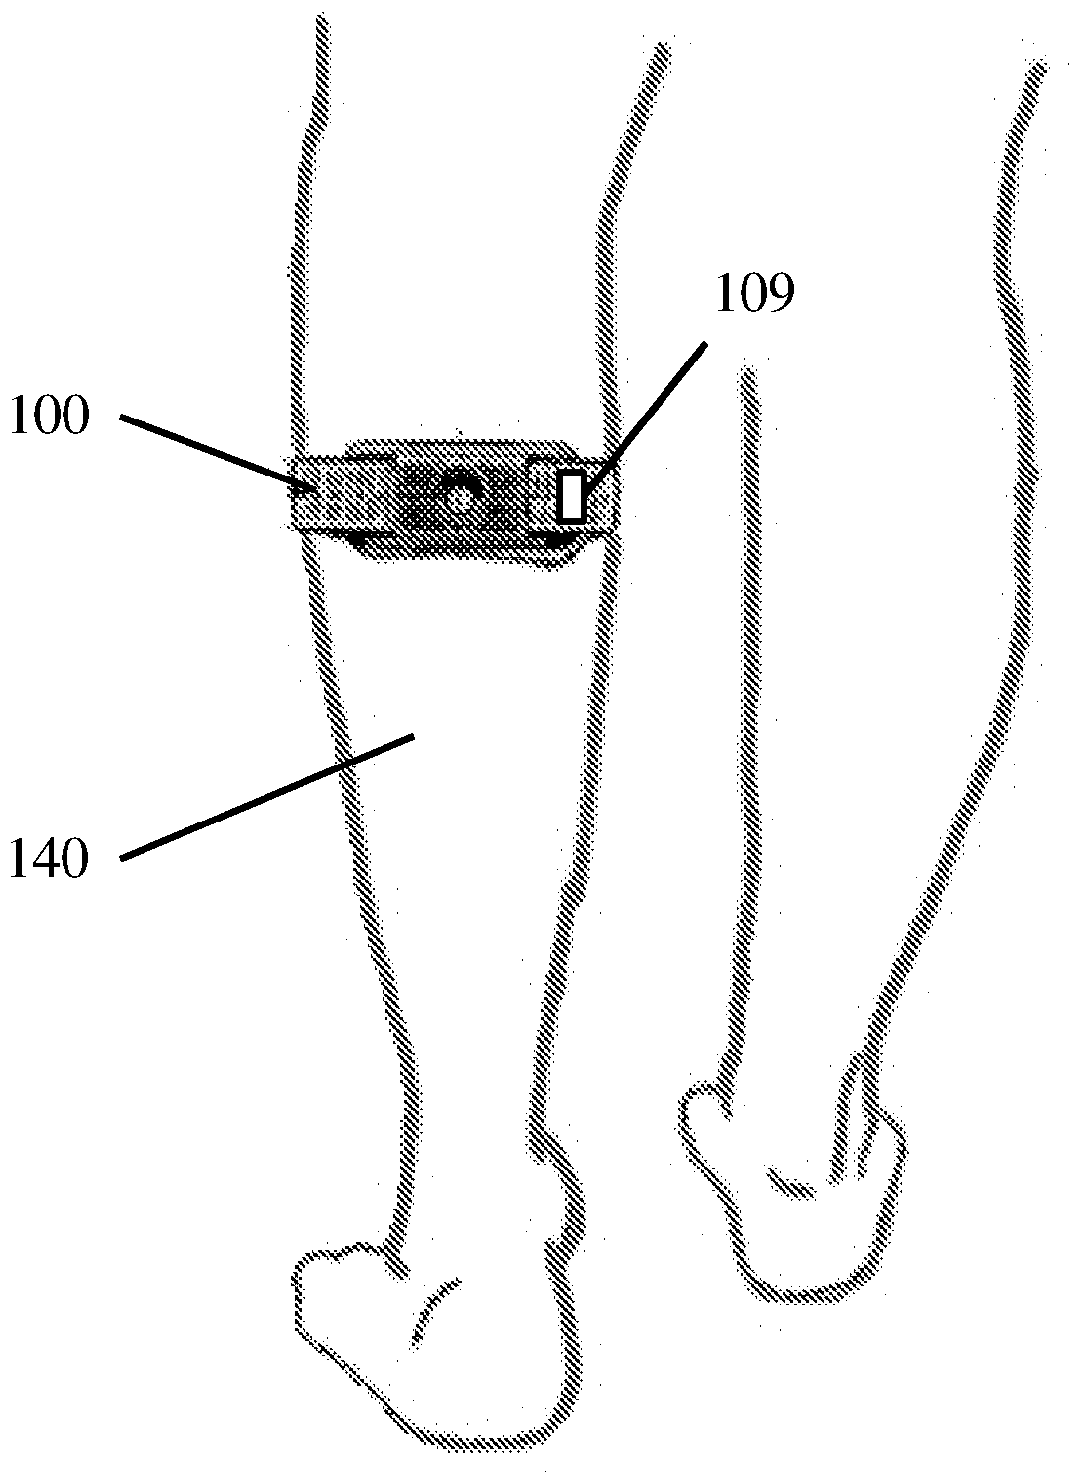 Enhanched transcutaneous electrical nerve stimulator with automatic detection of leg orientation and motion for enhanced sleep analysis